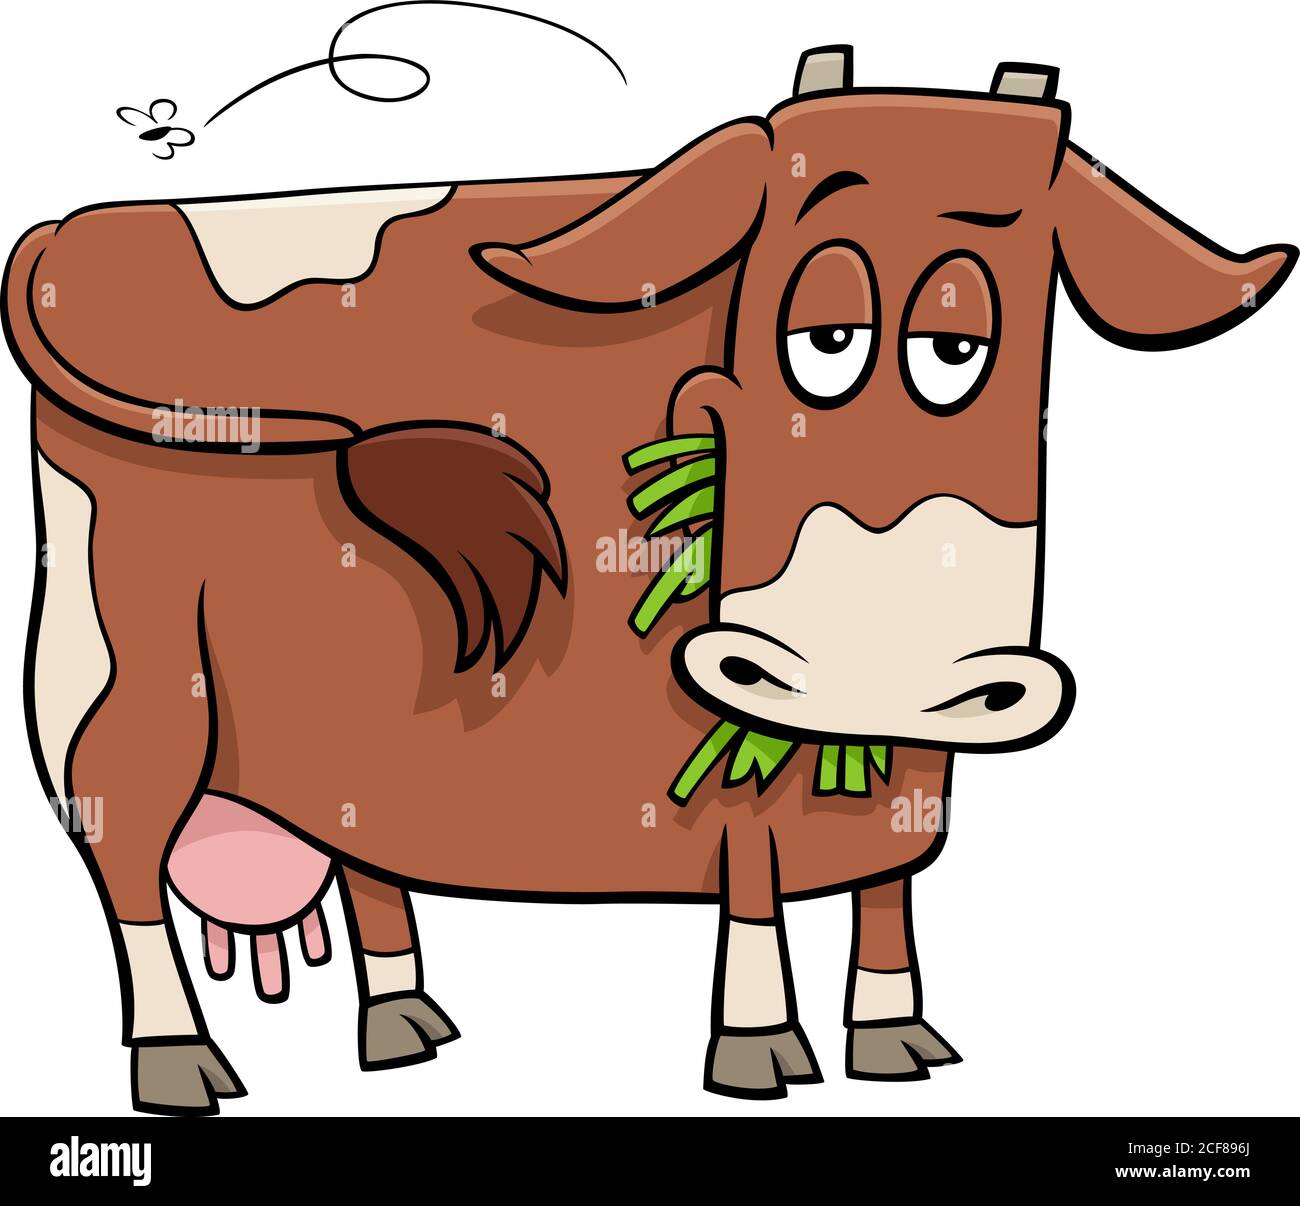 Cartoon Illustration of Spotted Cow Farm Animal Character Stock Vector